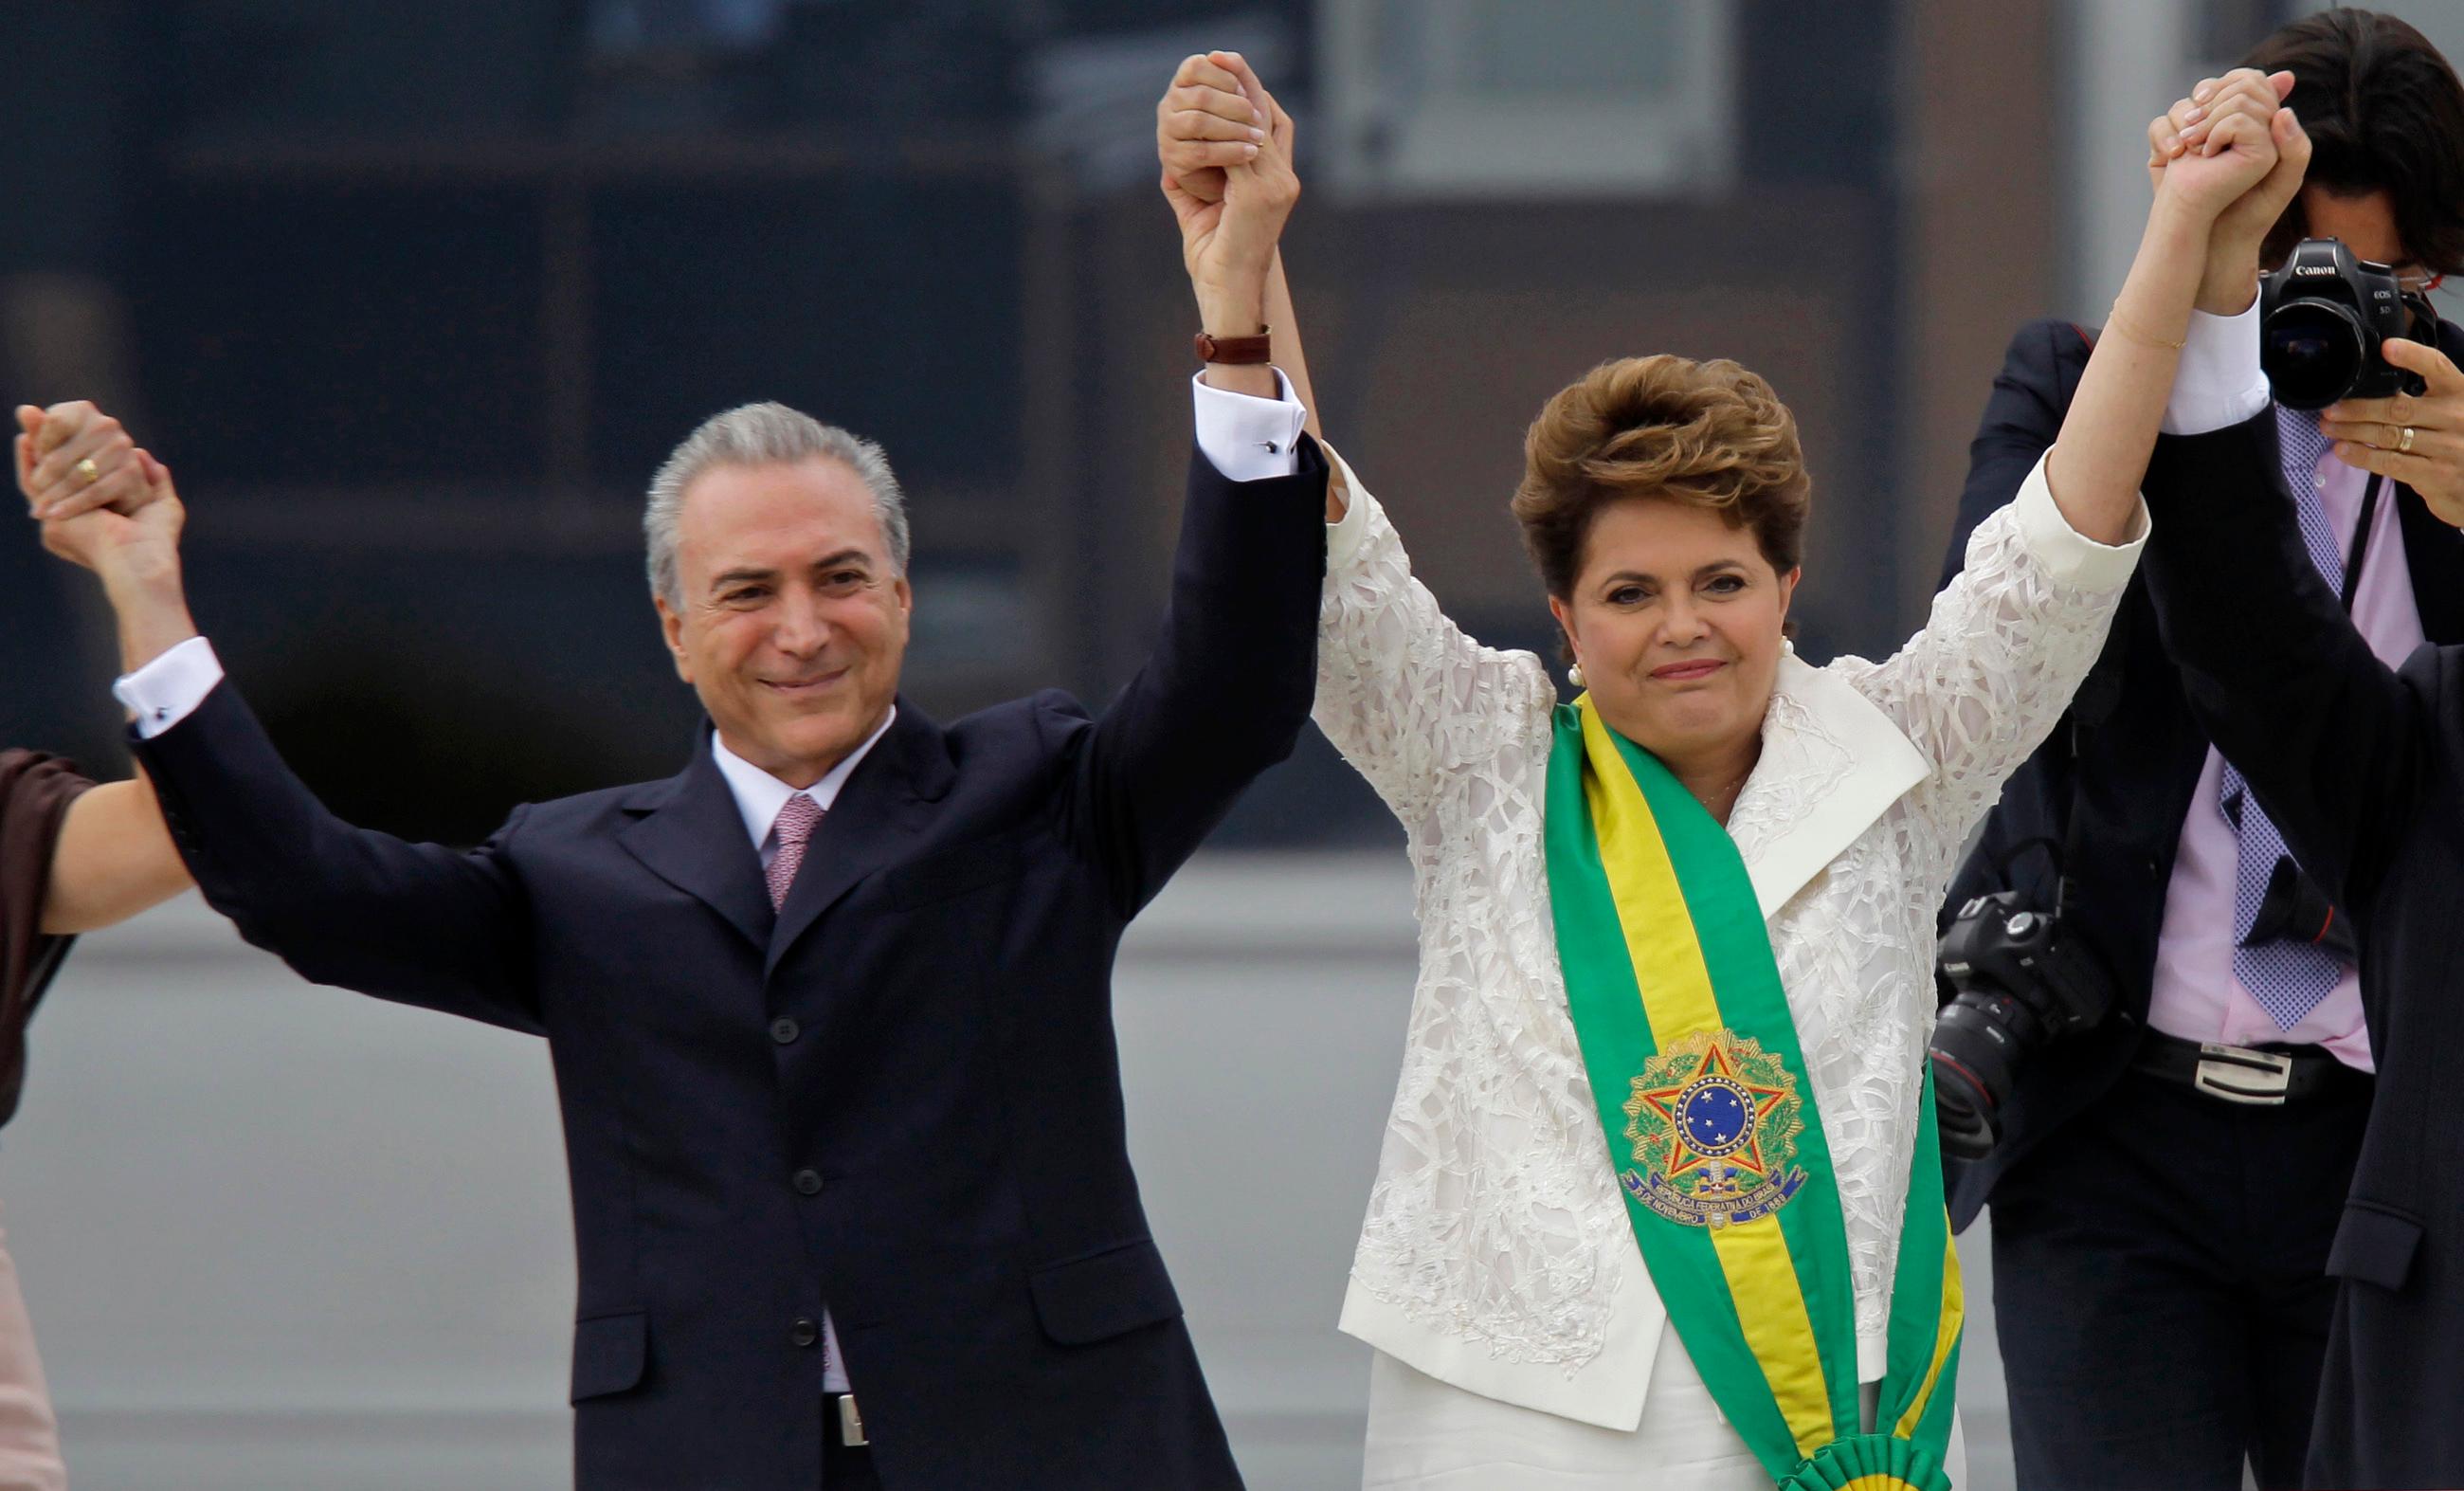 FILE - In this Jan. 1, 2011 file photo, Brazil's President Dilma Rousseff, right, raises arms with her Vice President Michel Temer at the end of her swearing-in ceremony at Planalto Palace in Brasilia, Brazil. Temer surprised Brazilians on Monday, Sept. 16, 2019 by referring to the 2016 impeachment of Rousseff as a coup for the first time. (AP Photo/Silvia Izquierdo, File)